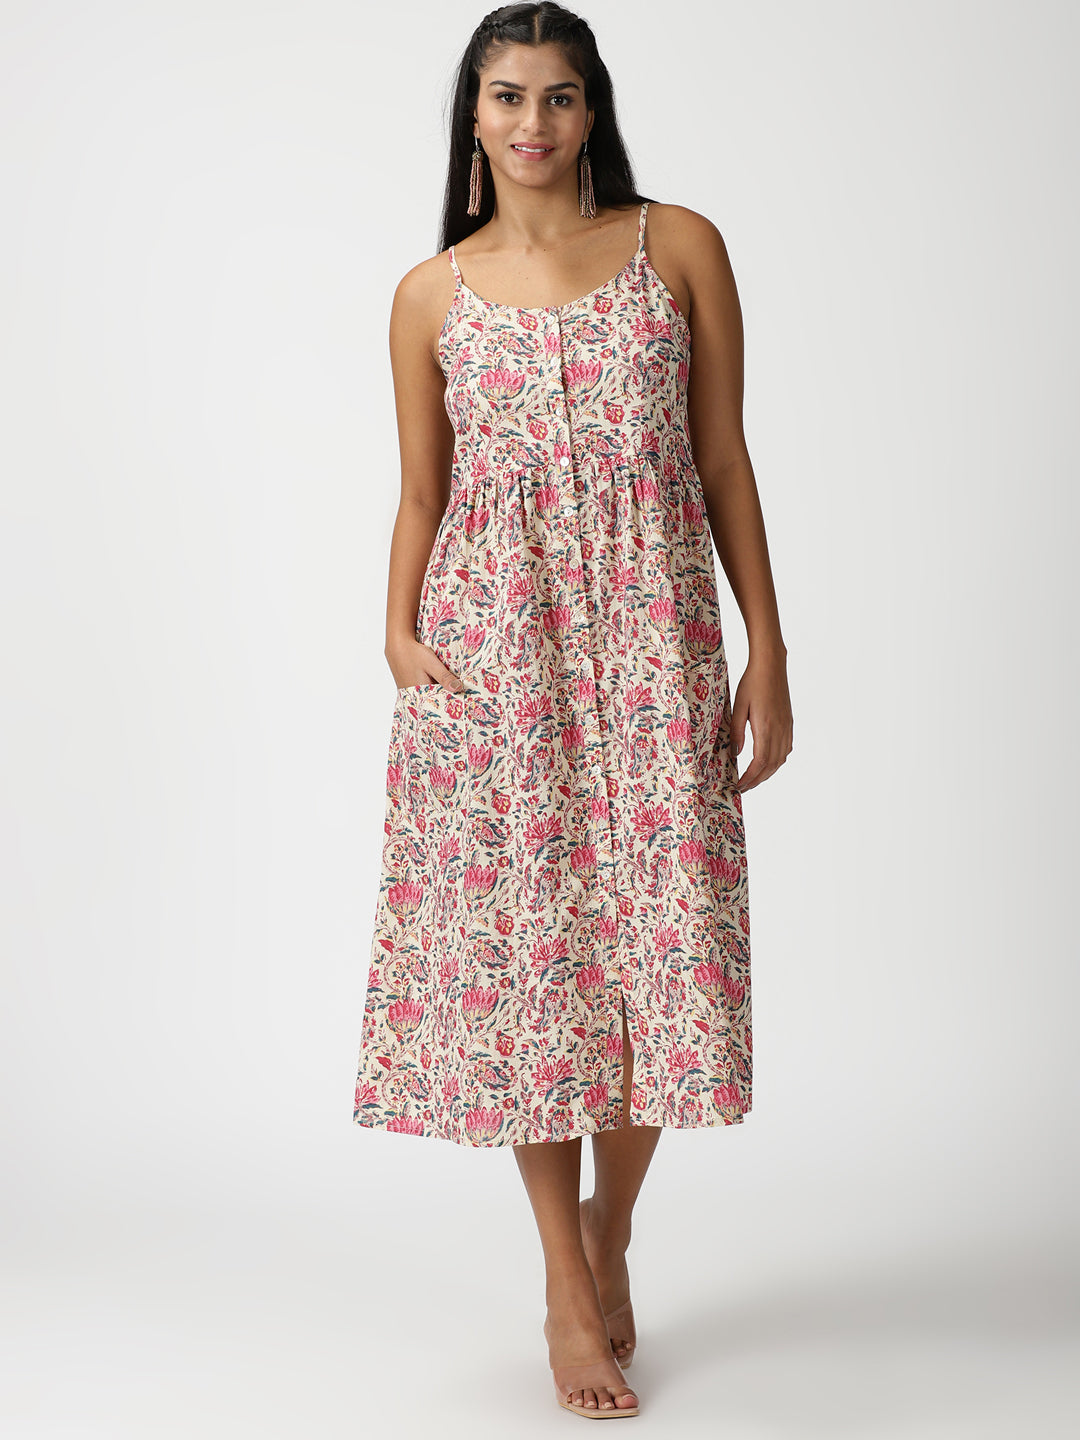 Gucci Floral Cotton Dress- With Tags- RRP$5,100 AUD | eBay